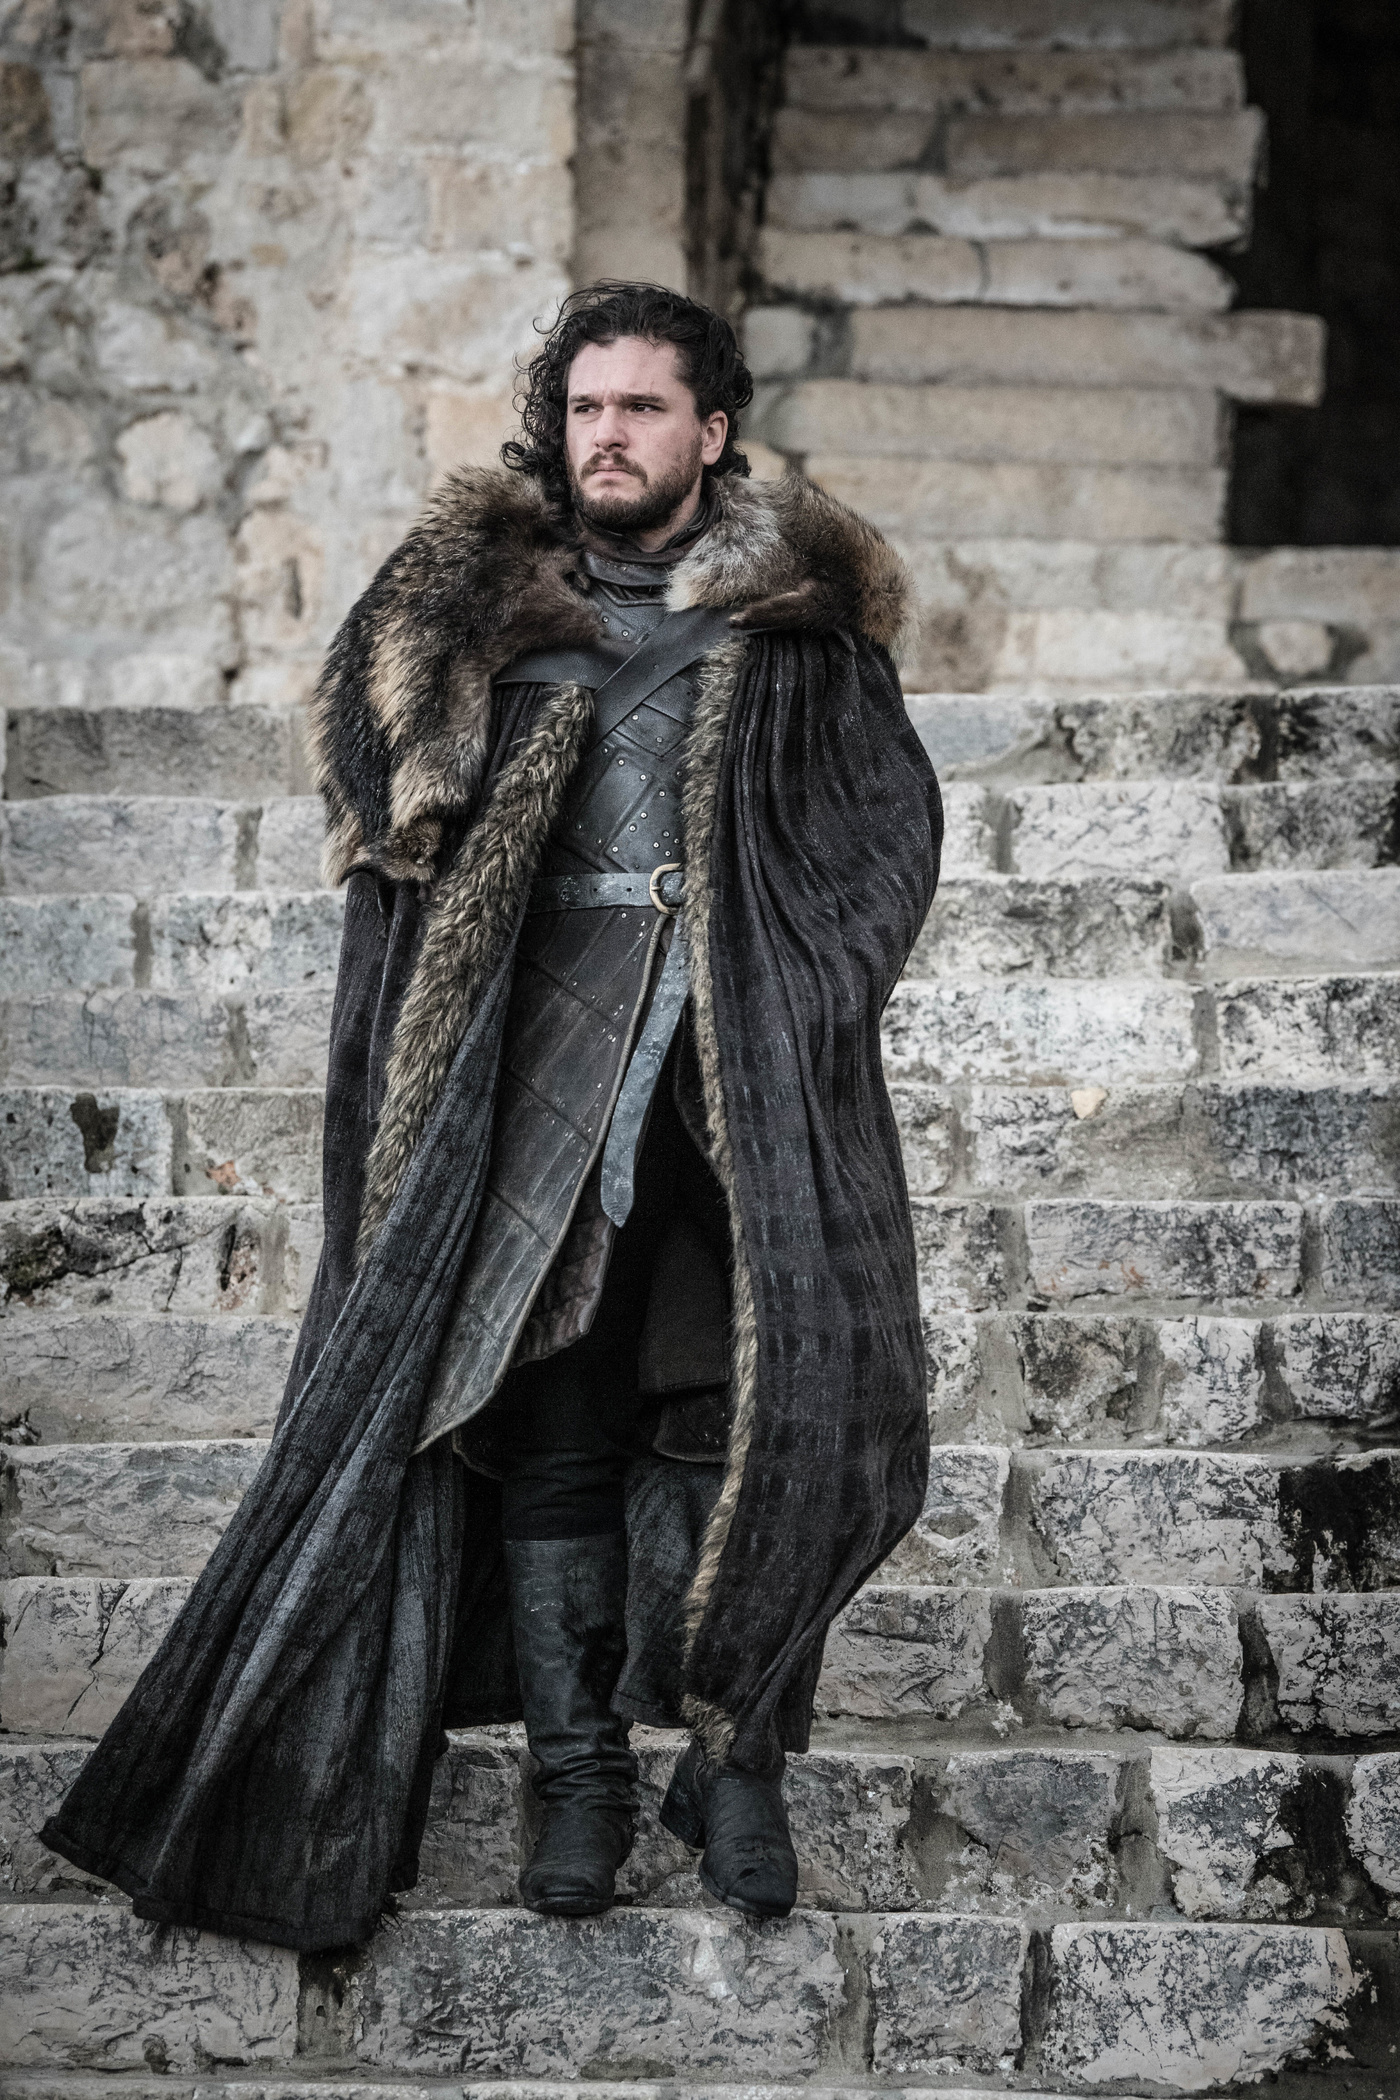 PHOTO: Kit Harington in a scene from "Game of Thrones."